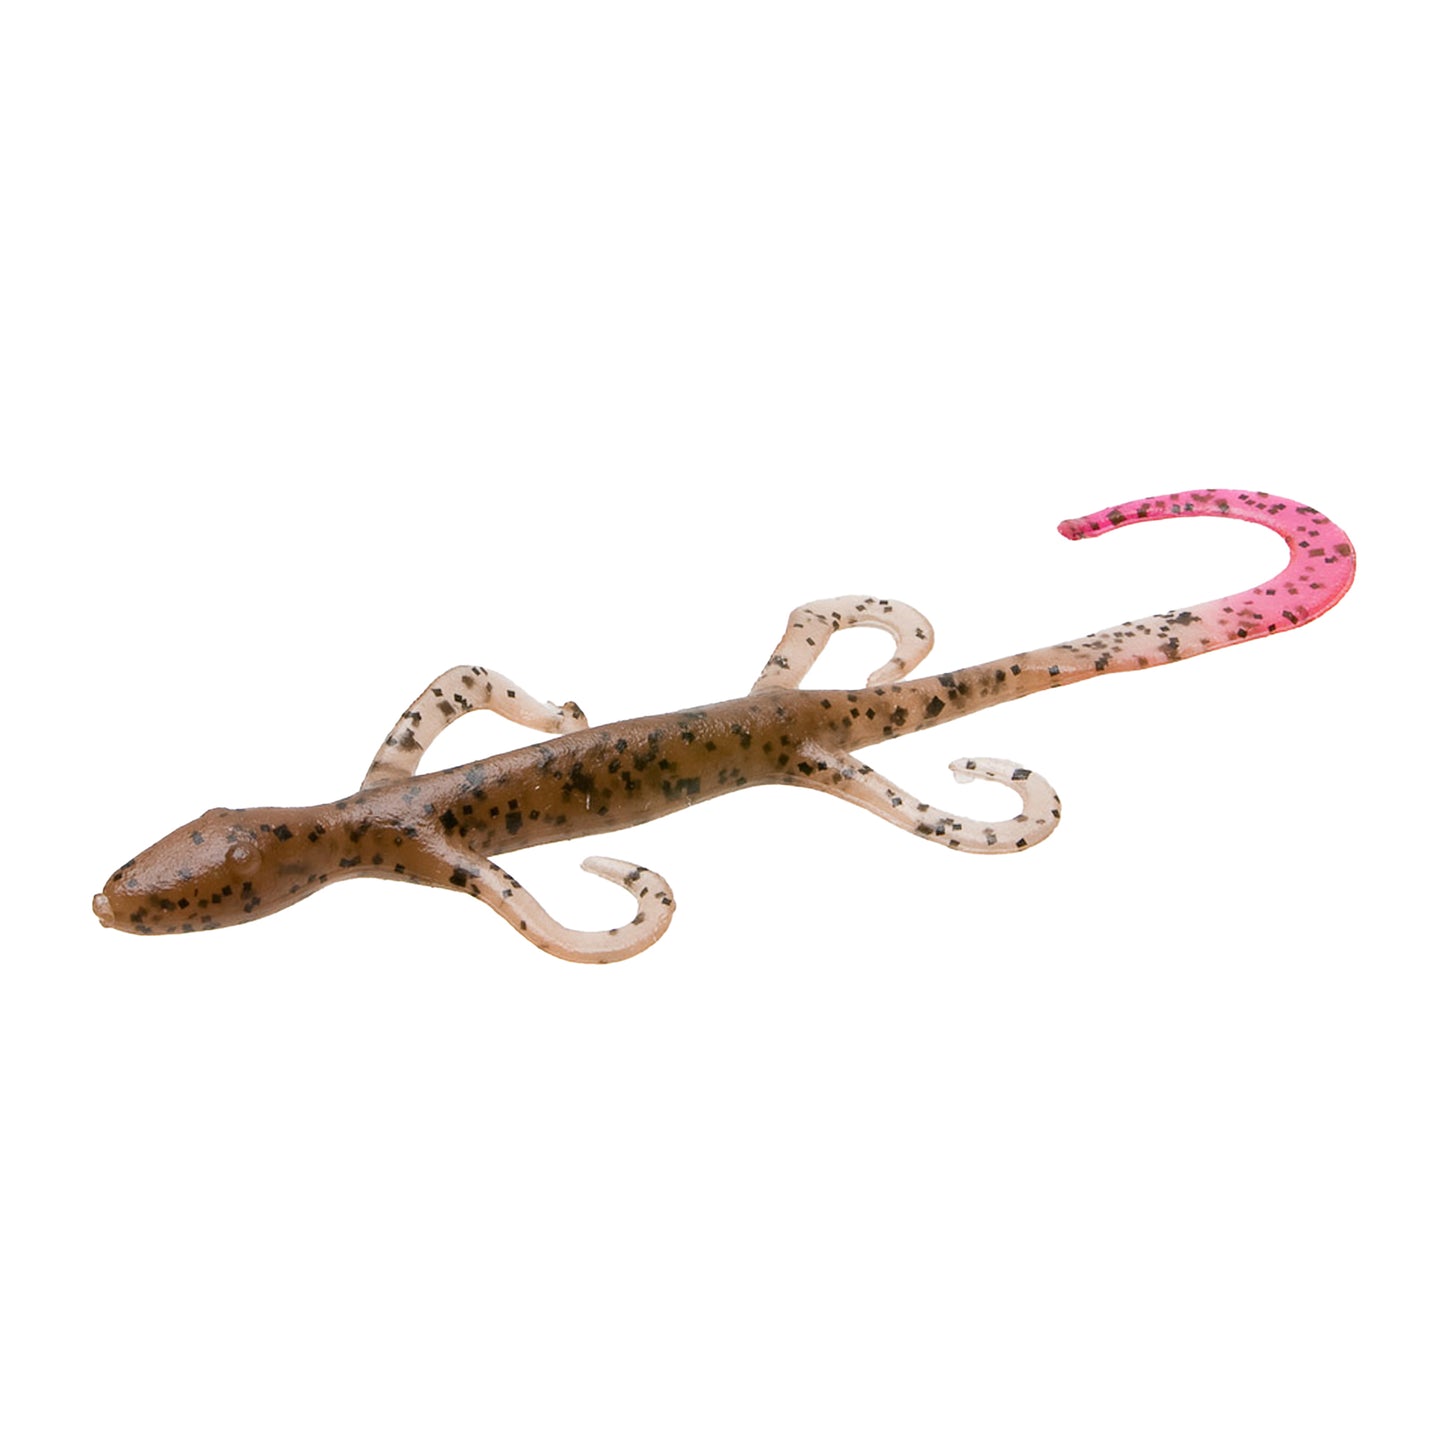 Zoom Lizard 6 – Lures and Lead